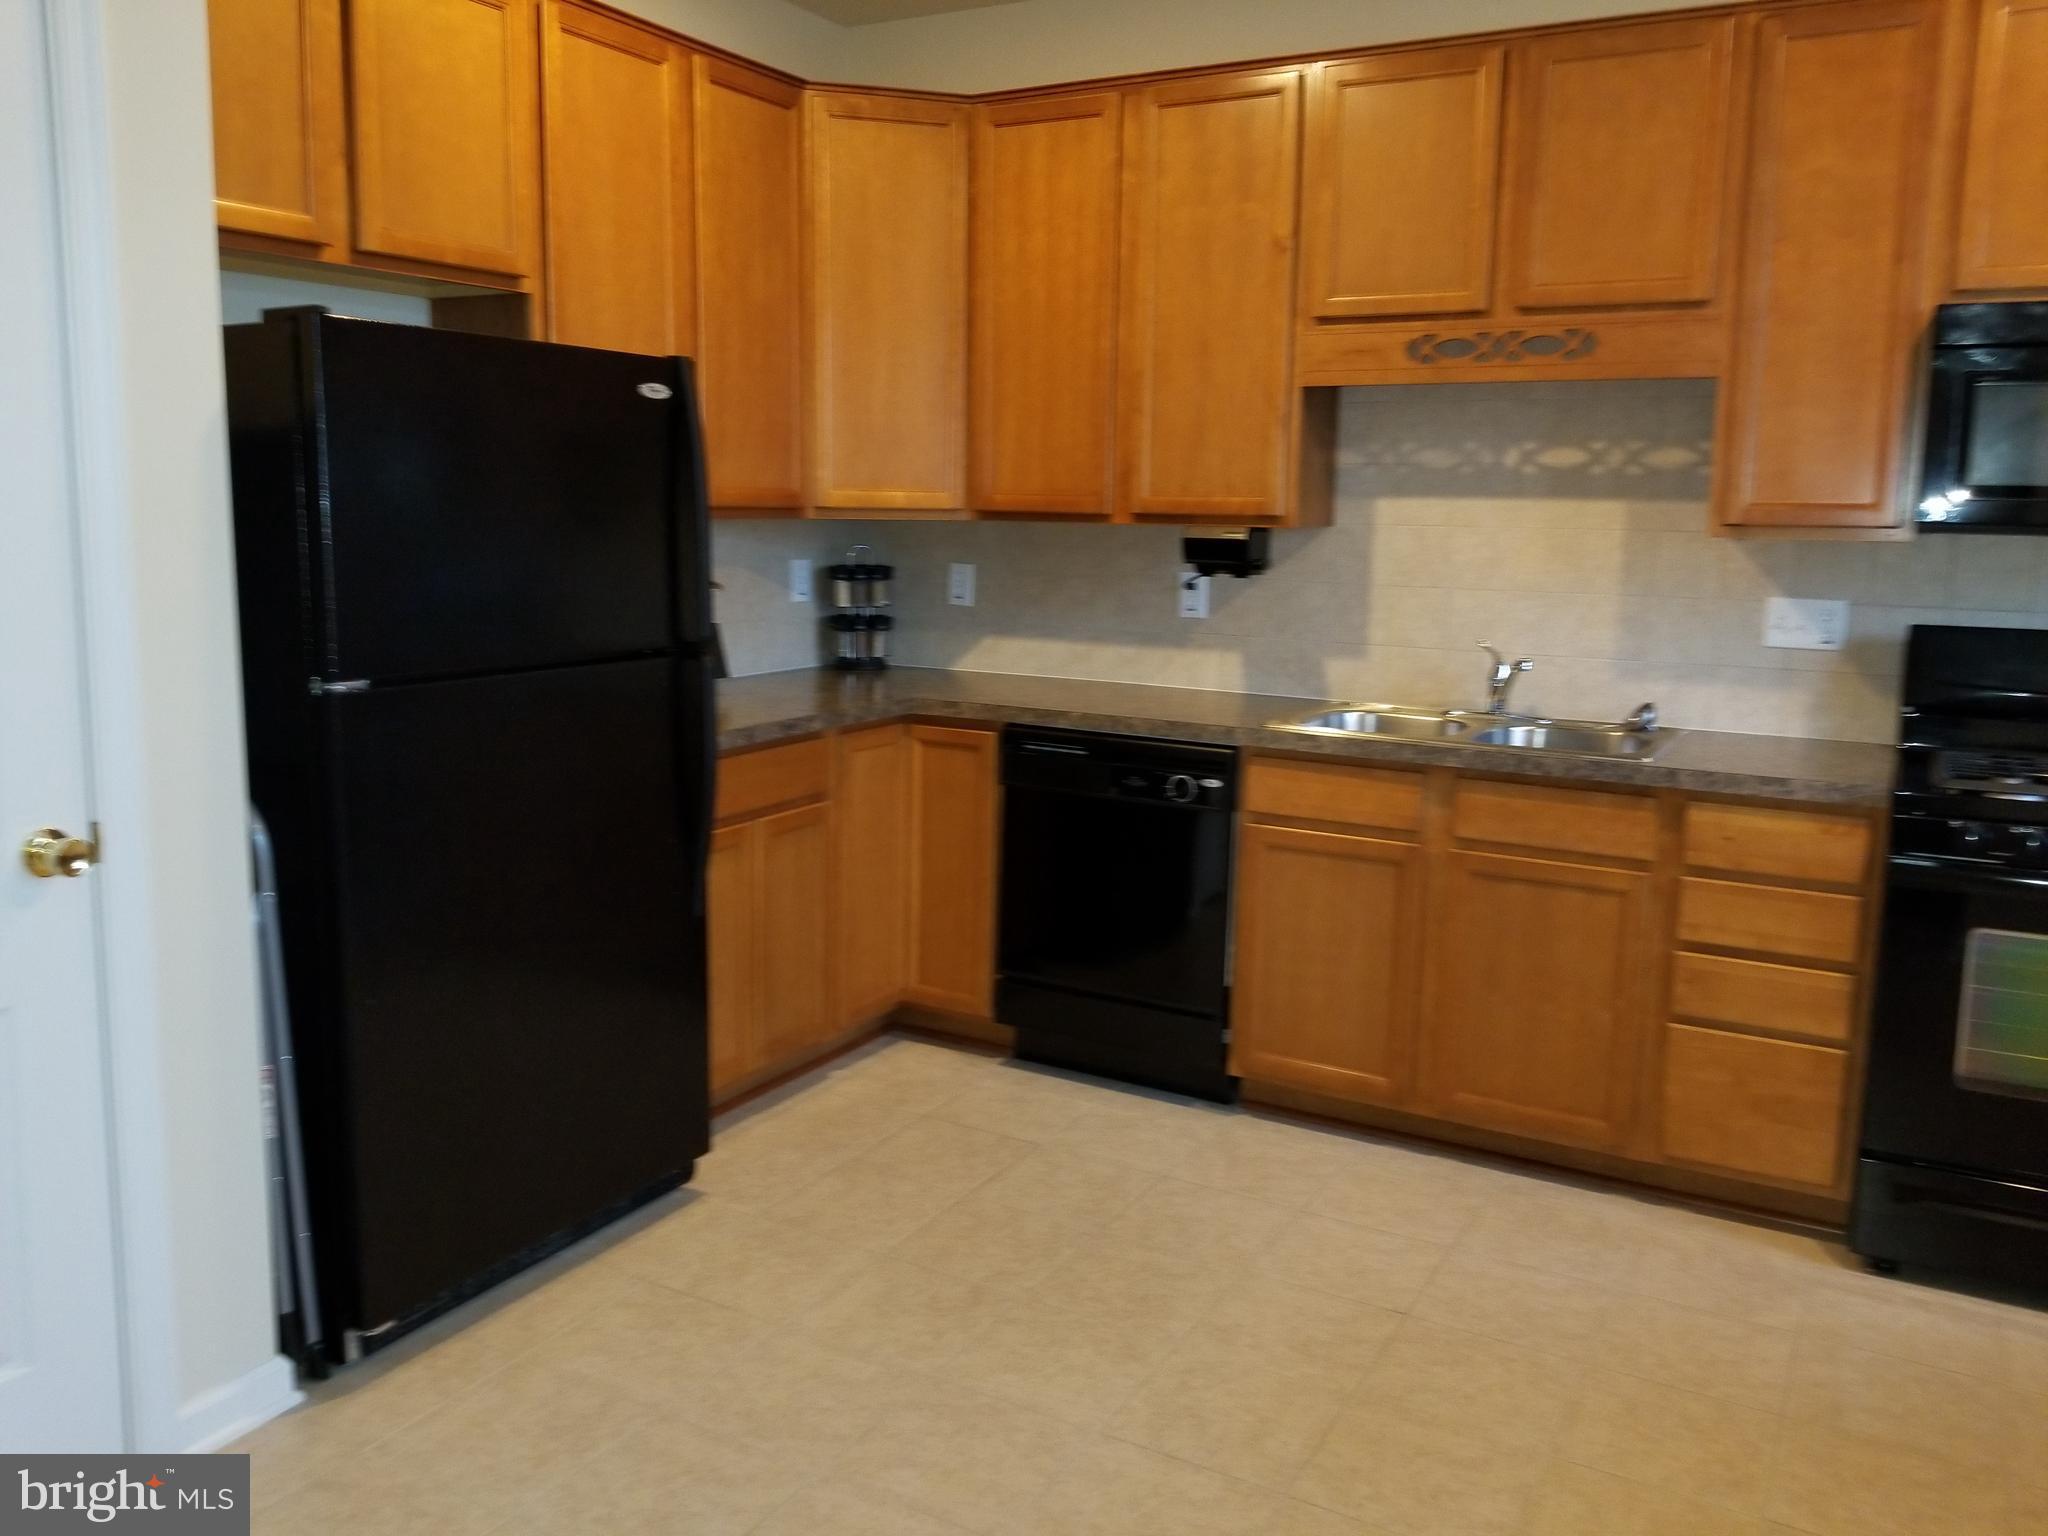 a kitchen with black cabinets and appliances